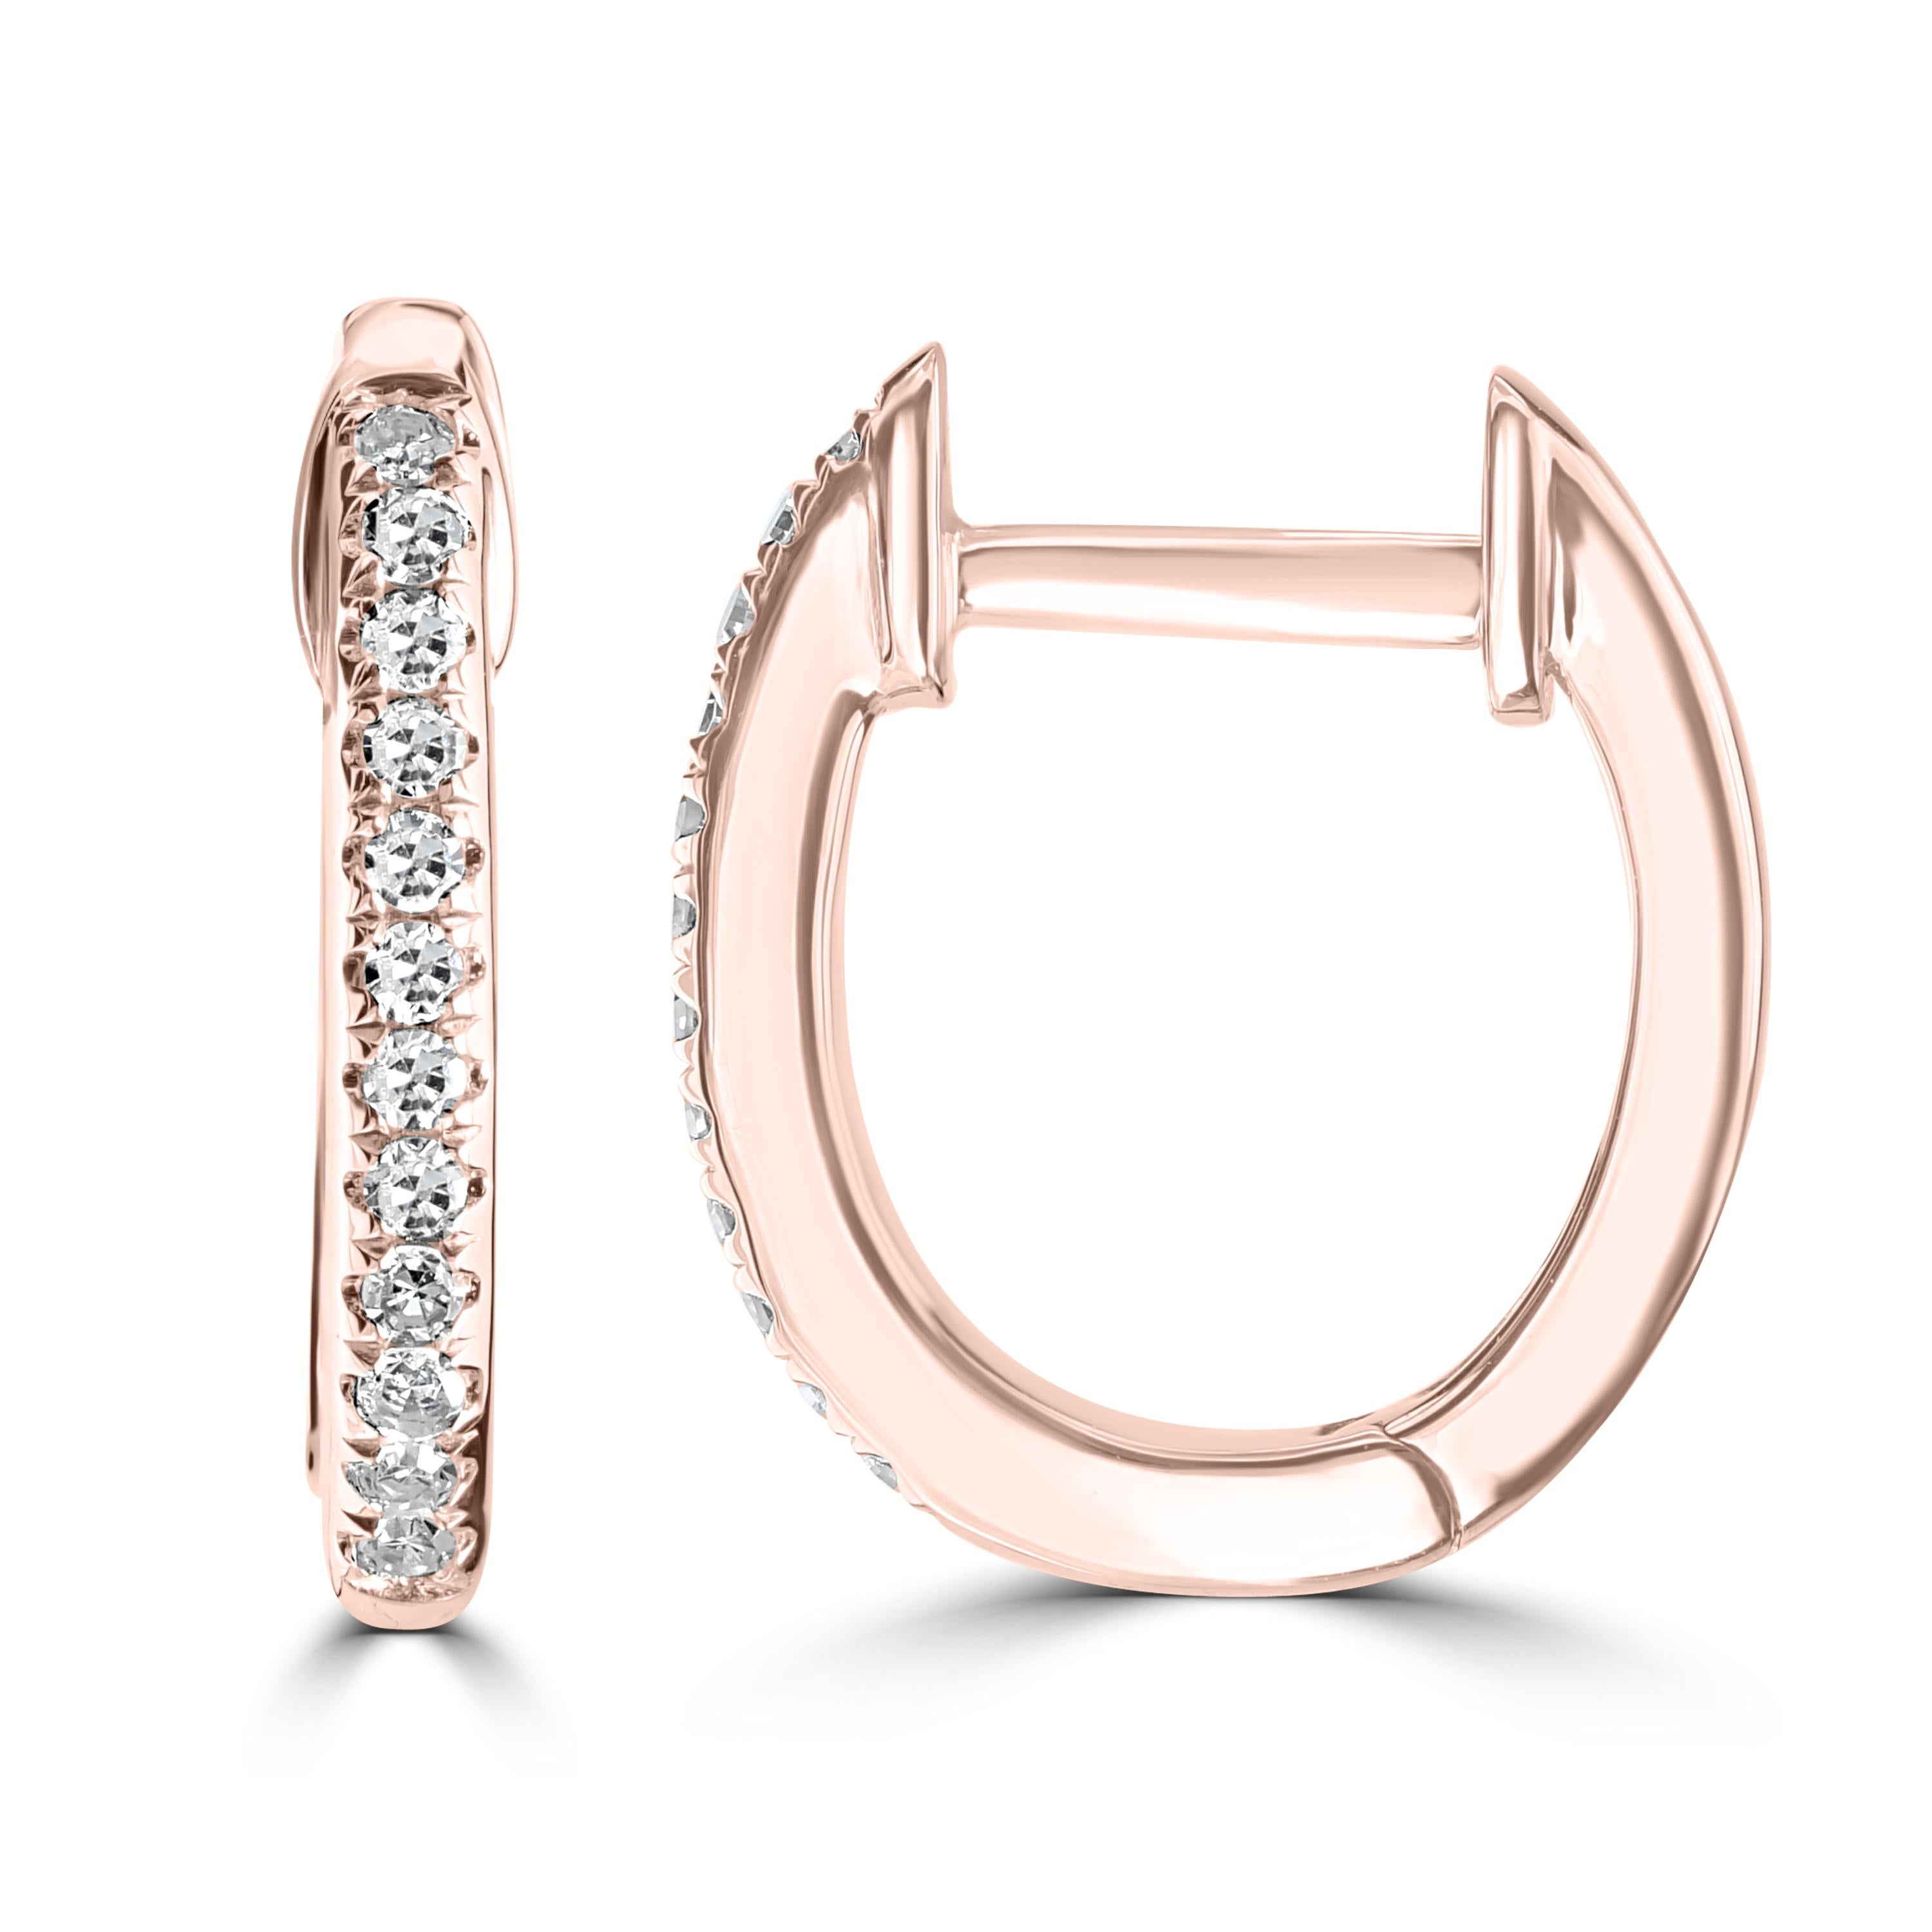 These Luxle adorable hoops glitter with 24 pave round diamonds. Handcrafted in 18K rose gold they come with huggie backs. Perfect for daily wear.

Please follow the Luxury Jewels storefront to view the latest collections & exclusive one of a kind